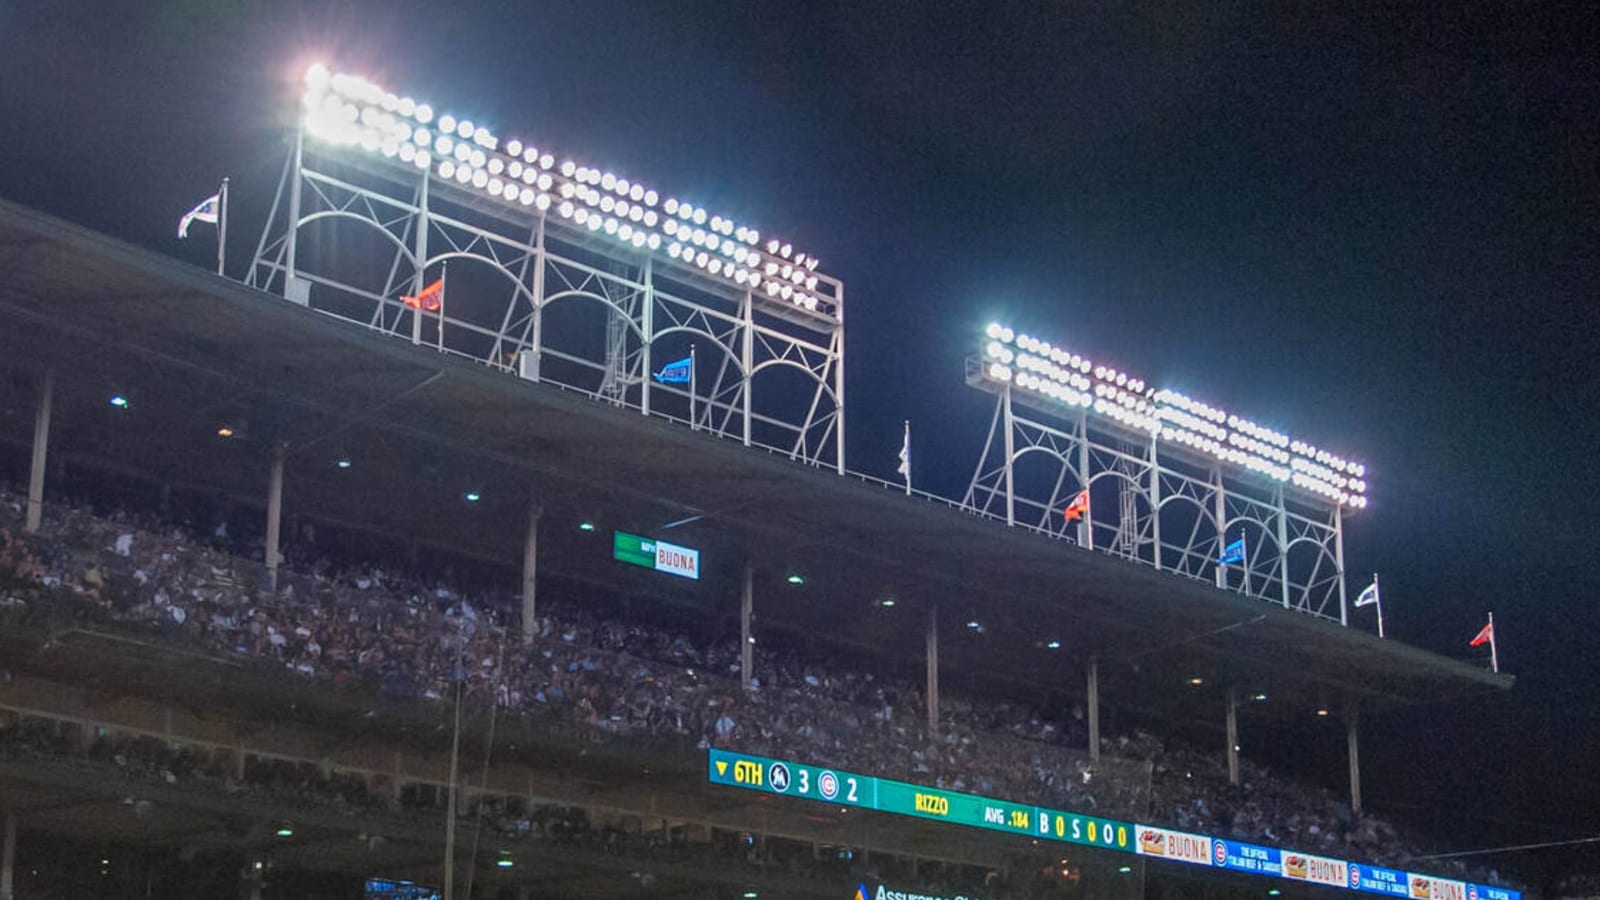 See a few changes coming to Wrigley Field for fans in 2023